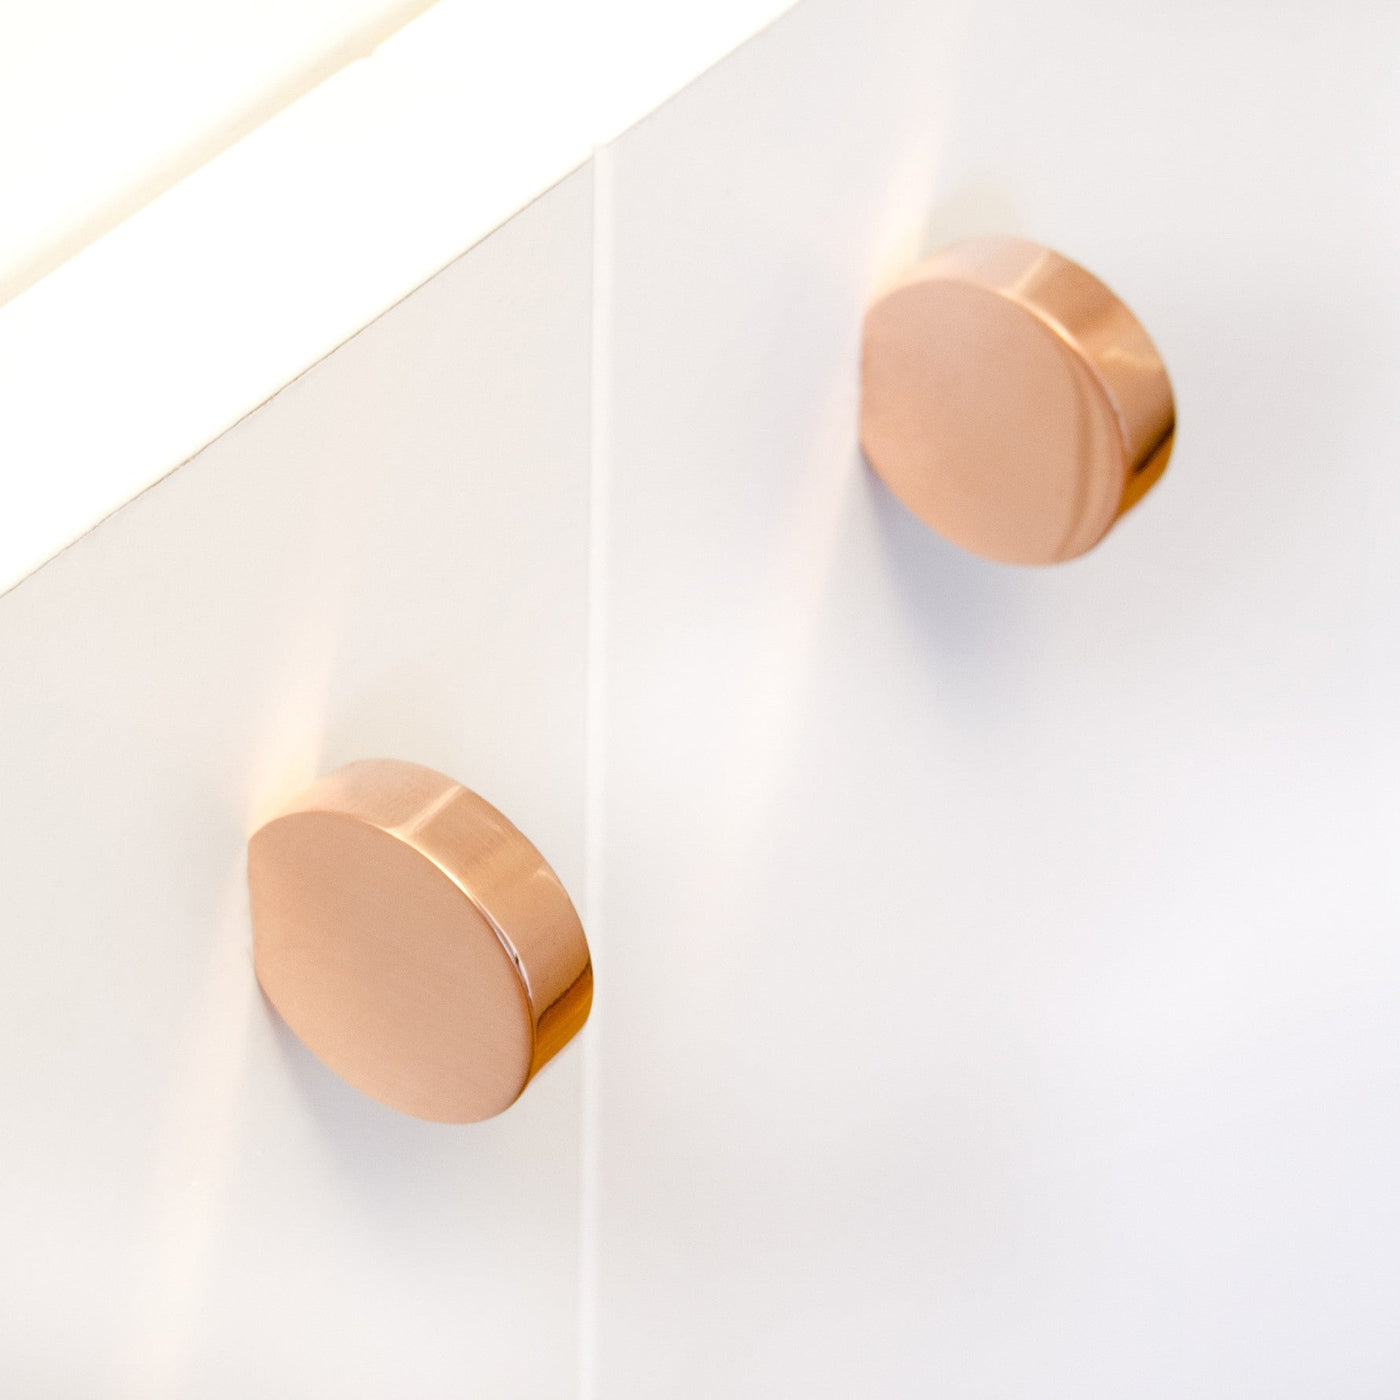 Mini circular knobs mounted vertically. Copper finish.